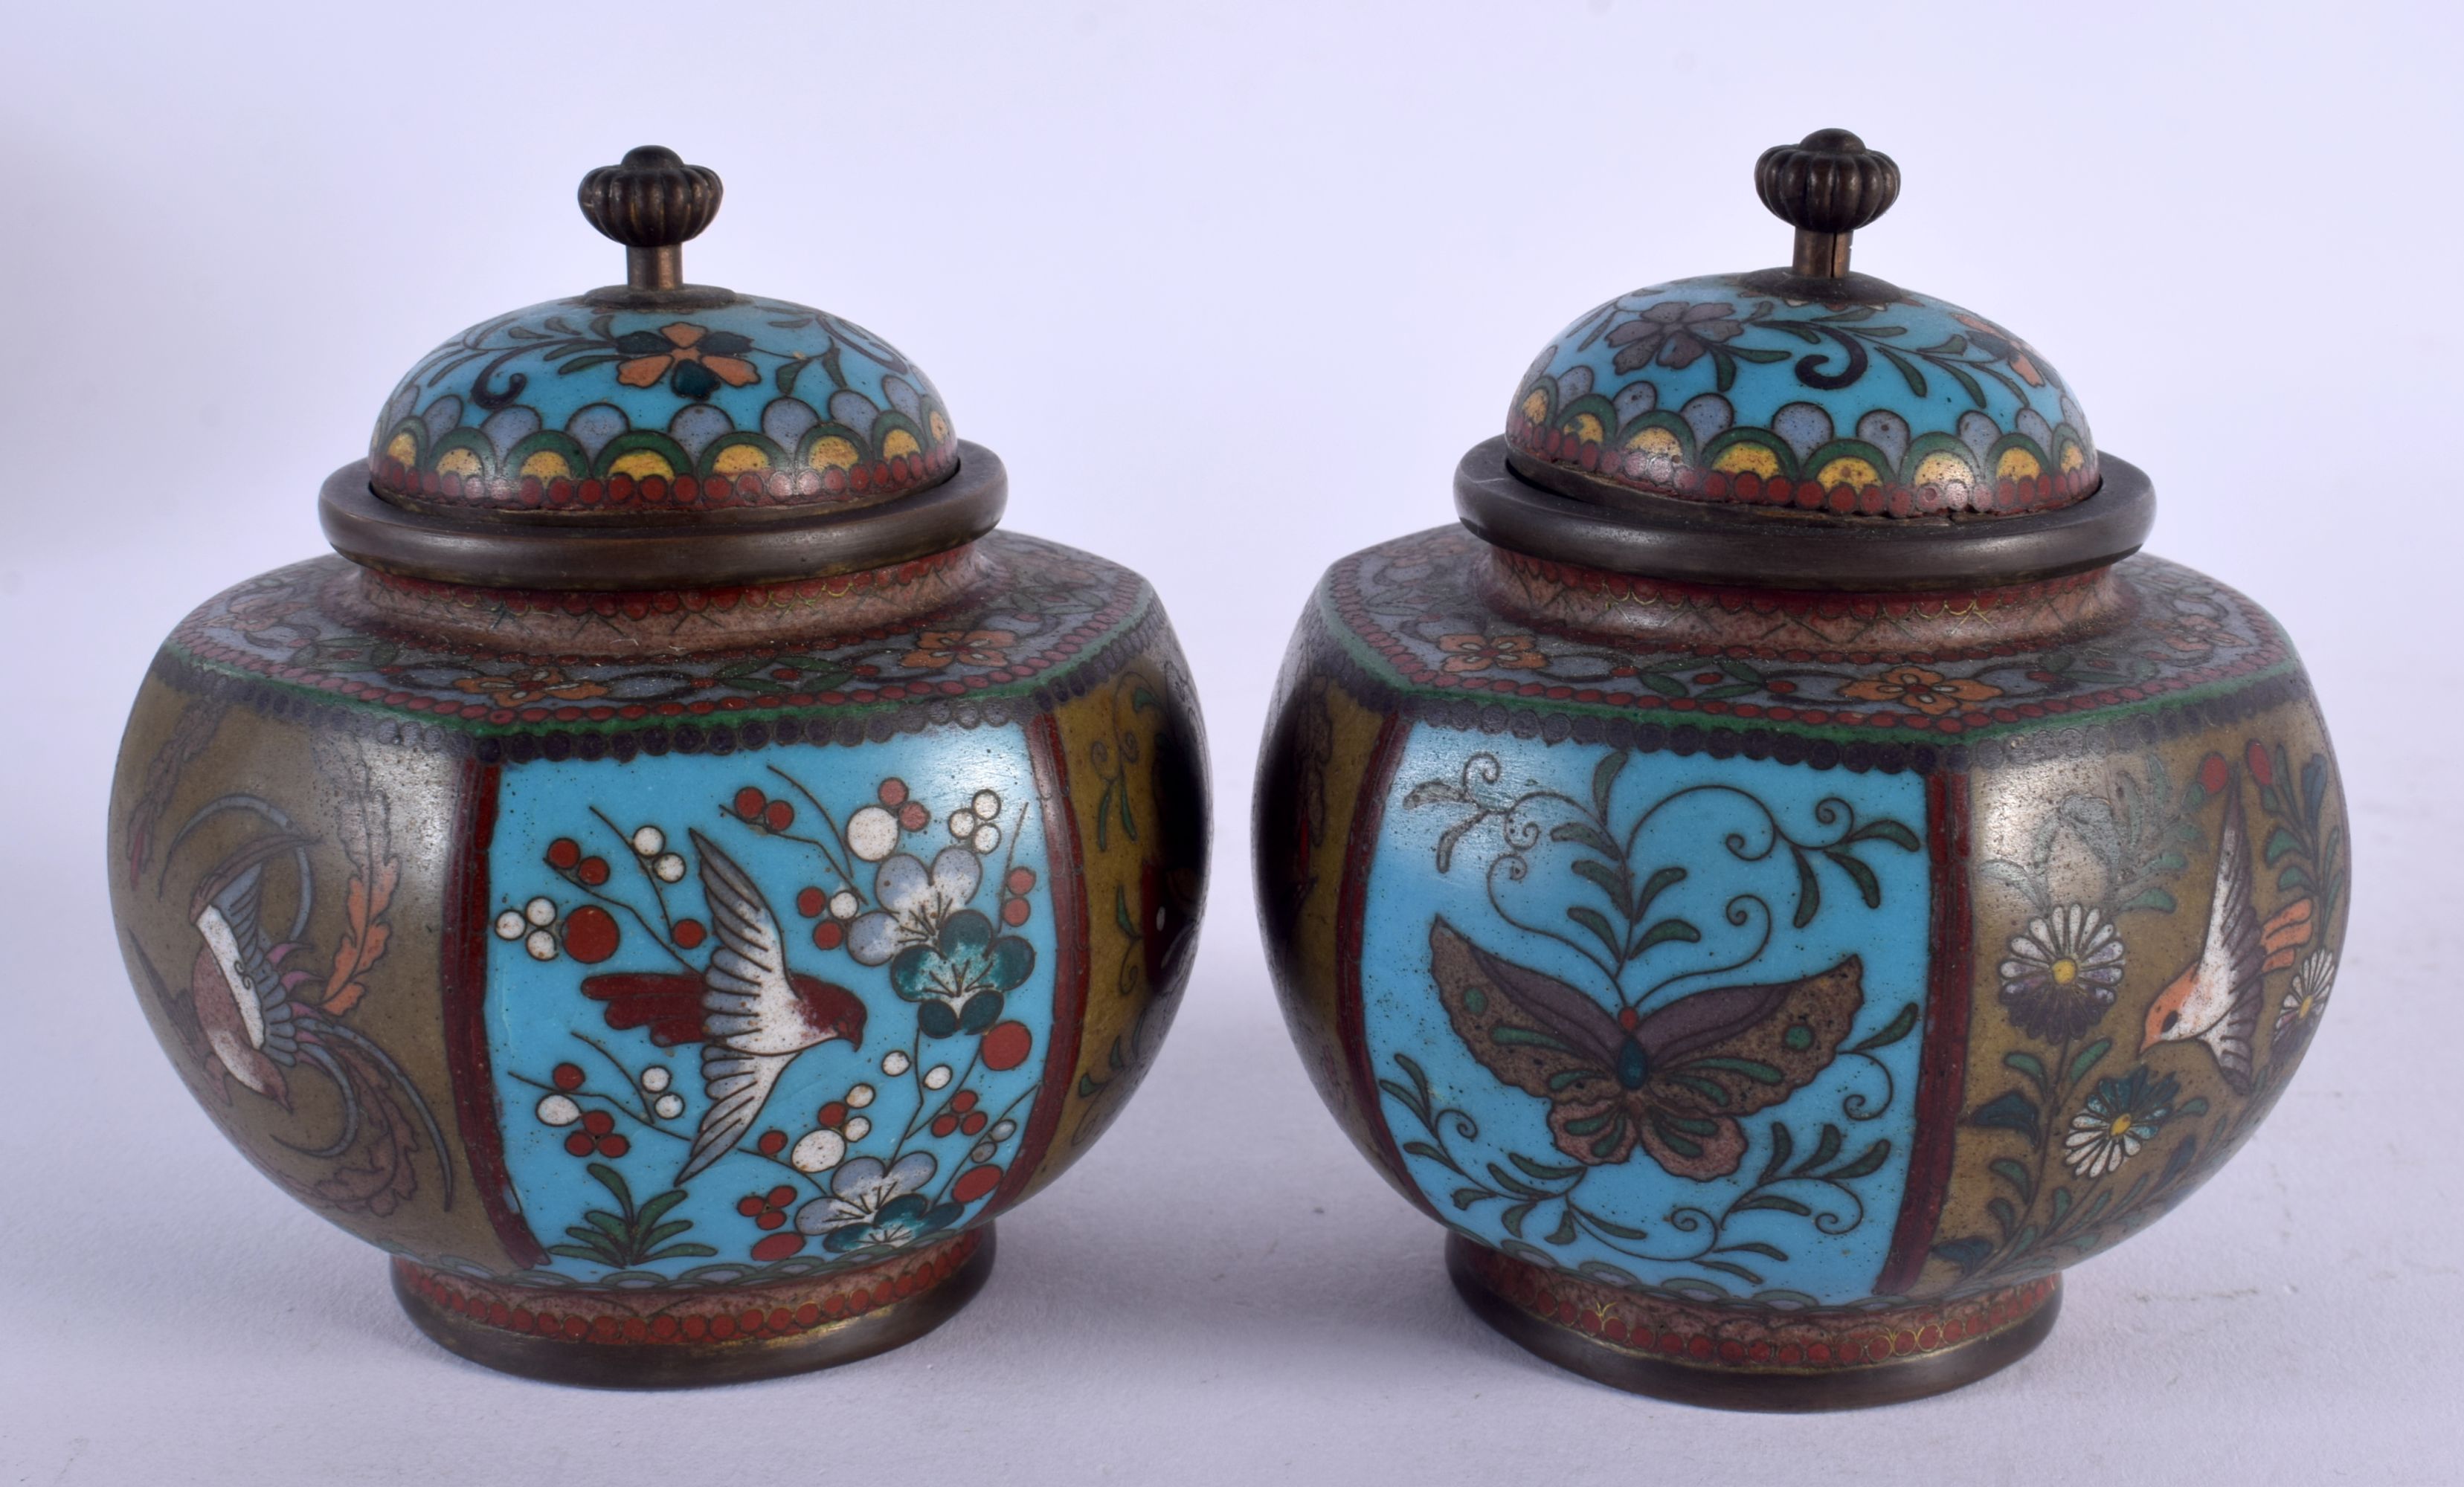 A PAIR OF 19TH CENTURY JAPANESE MEIJI PERIOD CLOISONNE ENAMEL JARS AND COVERS decorated with insects